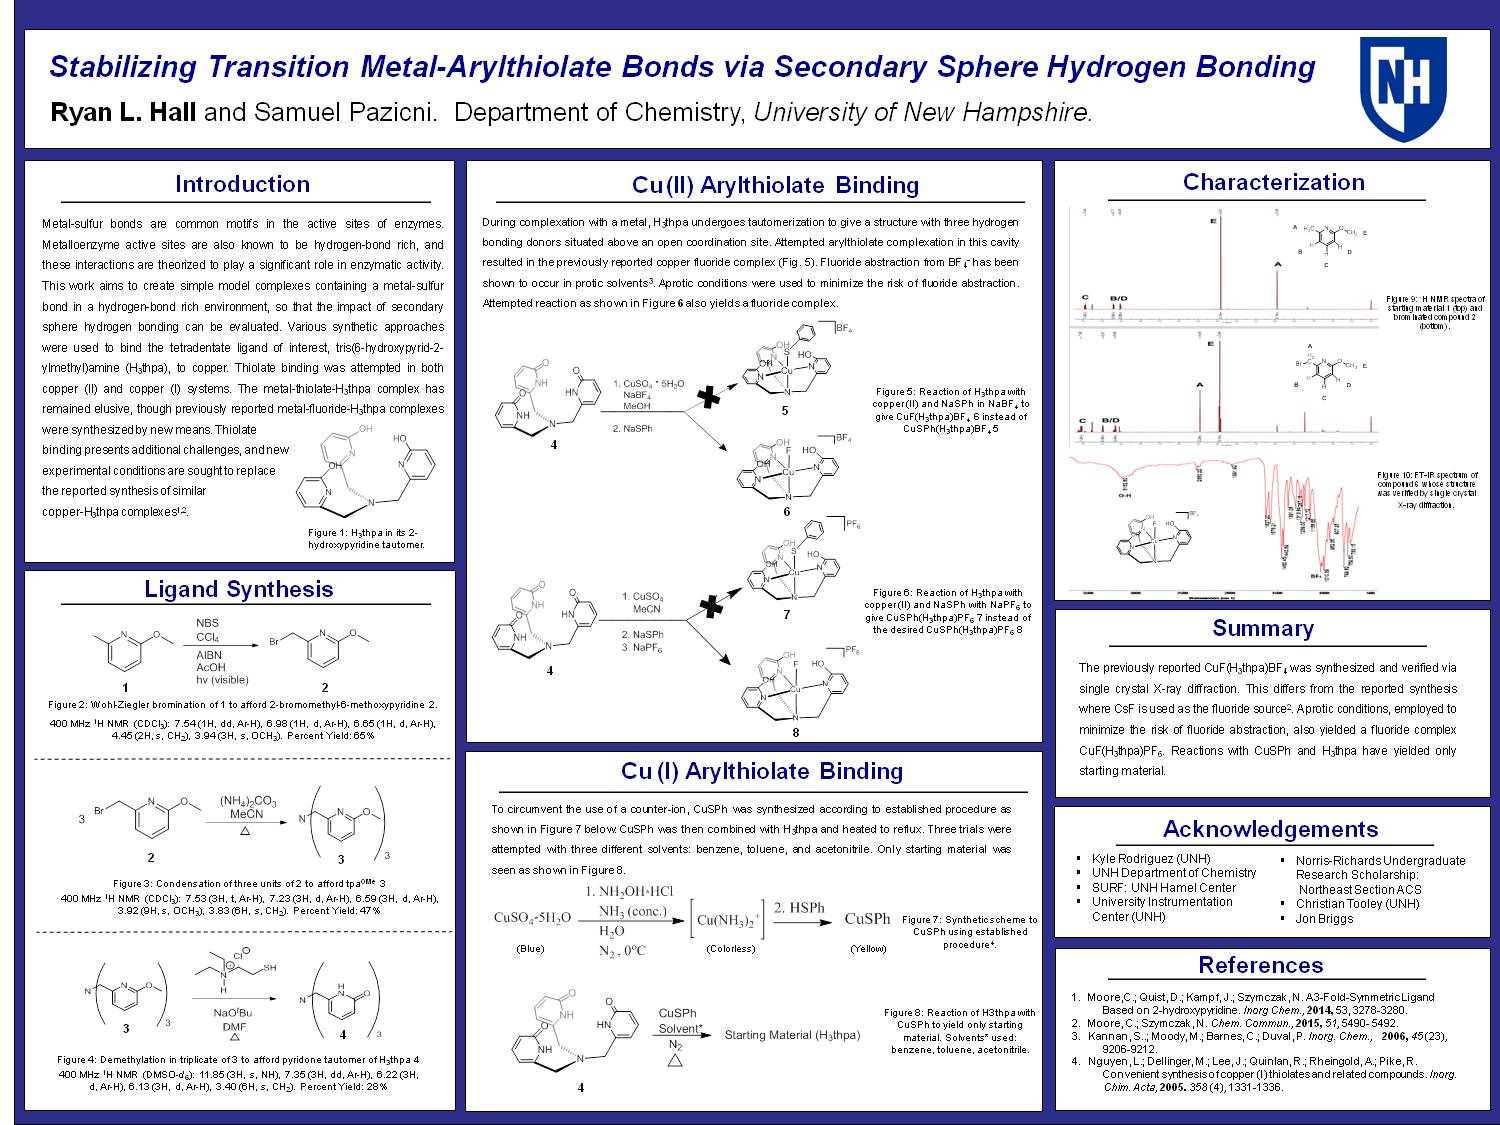 Stabilizing Transition Metal-Arylthiolate Bonds Via Secondary Sphere Hydrogen Bonding by rll367